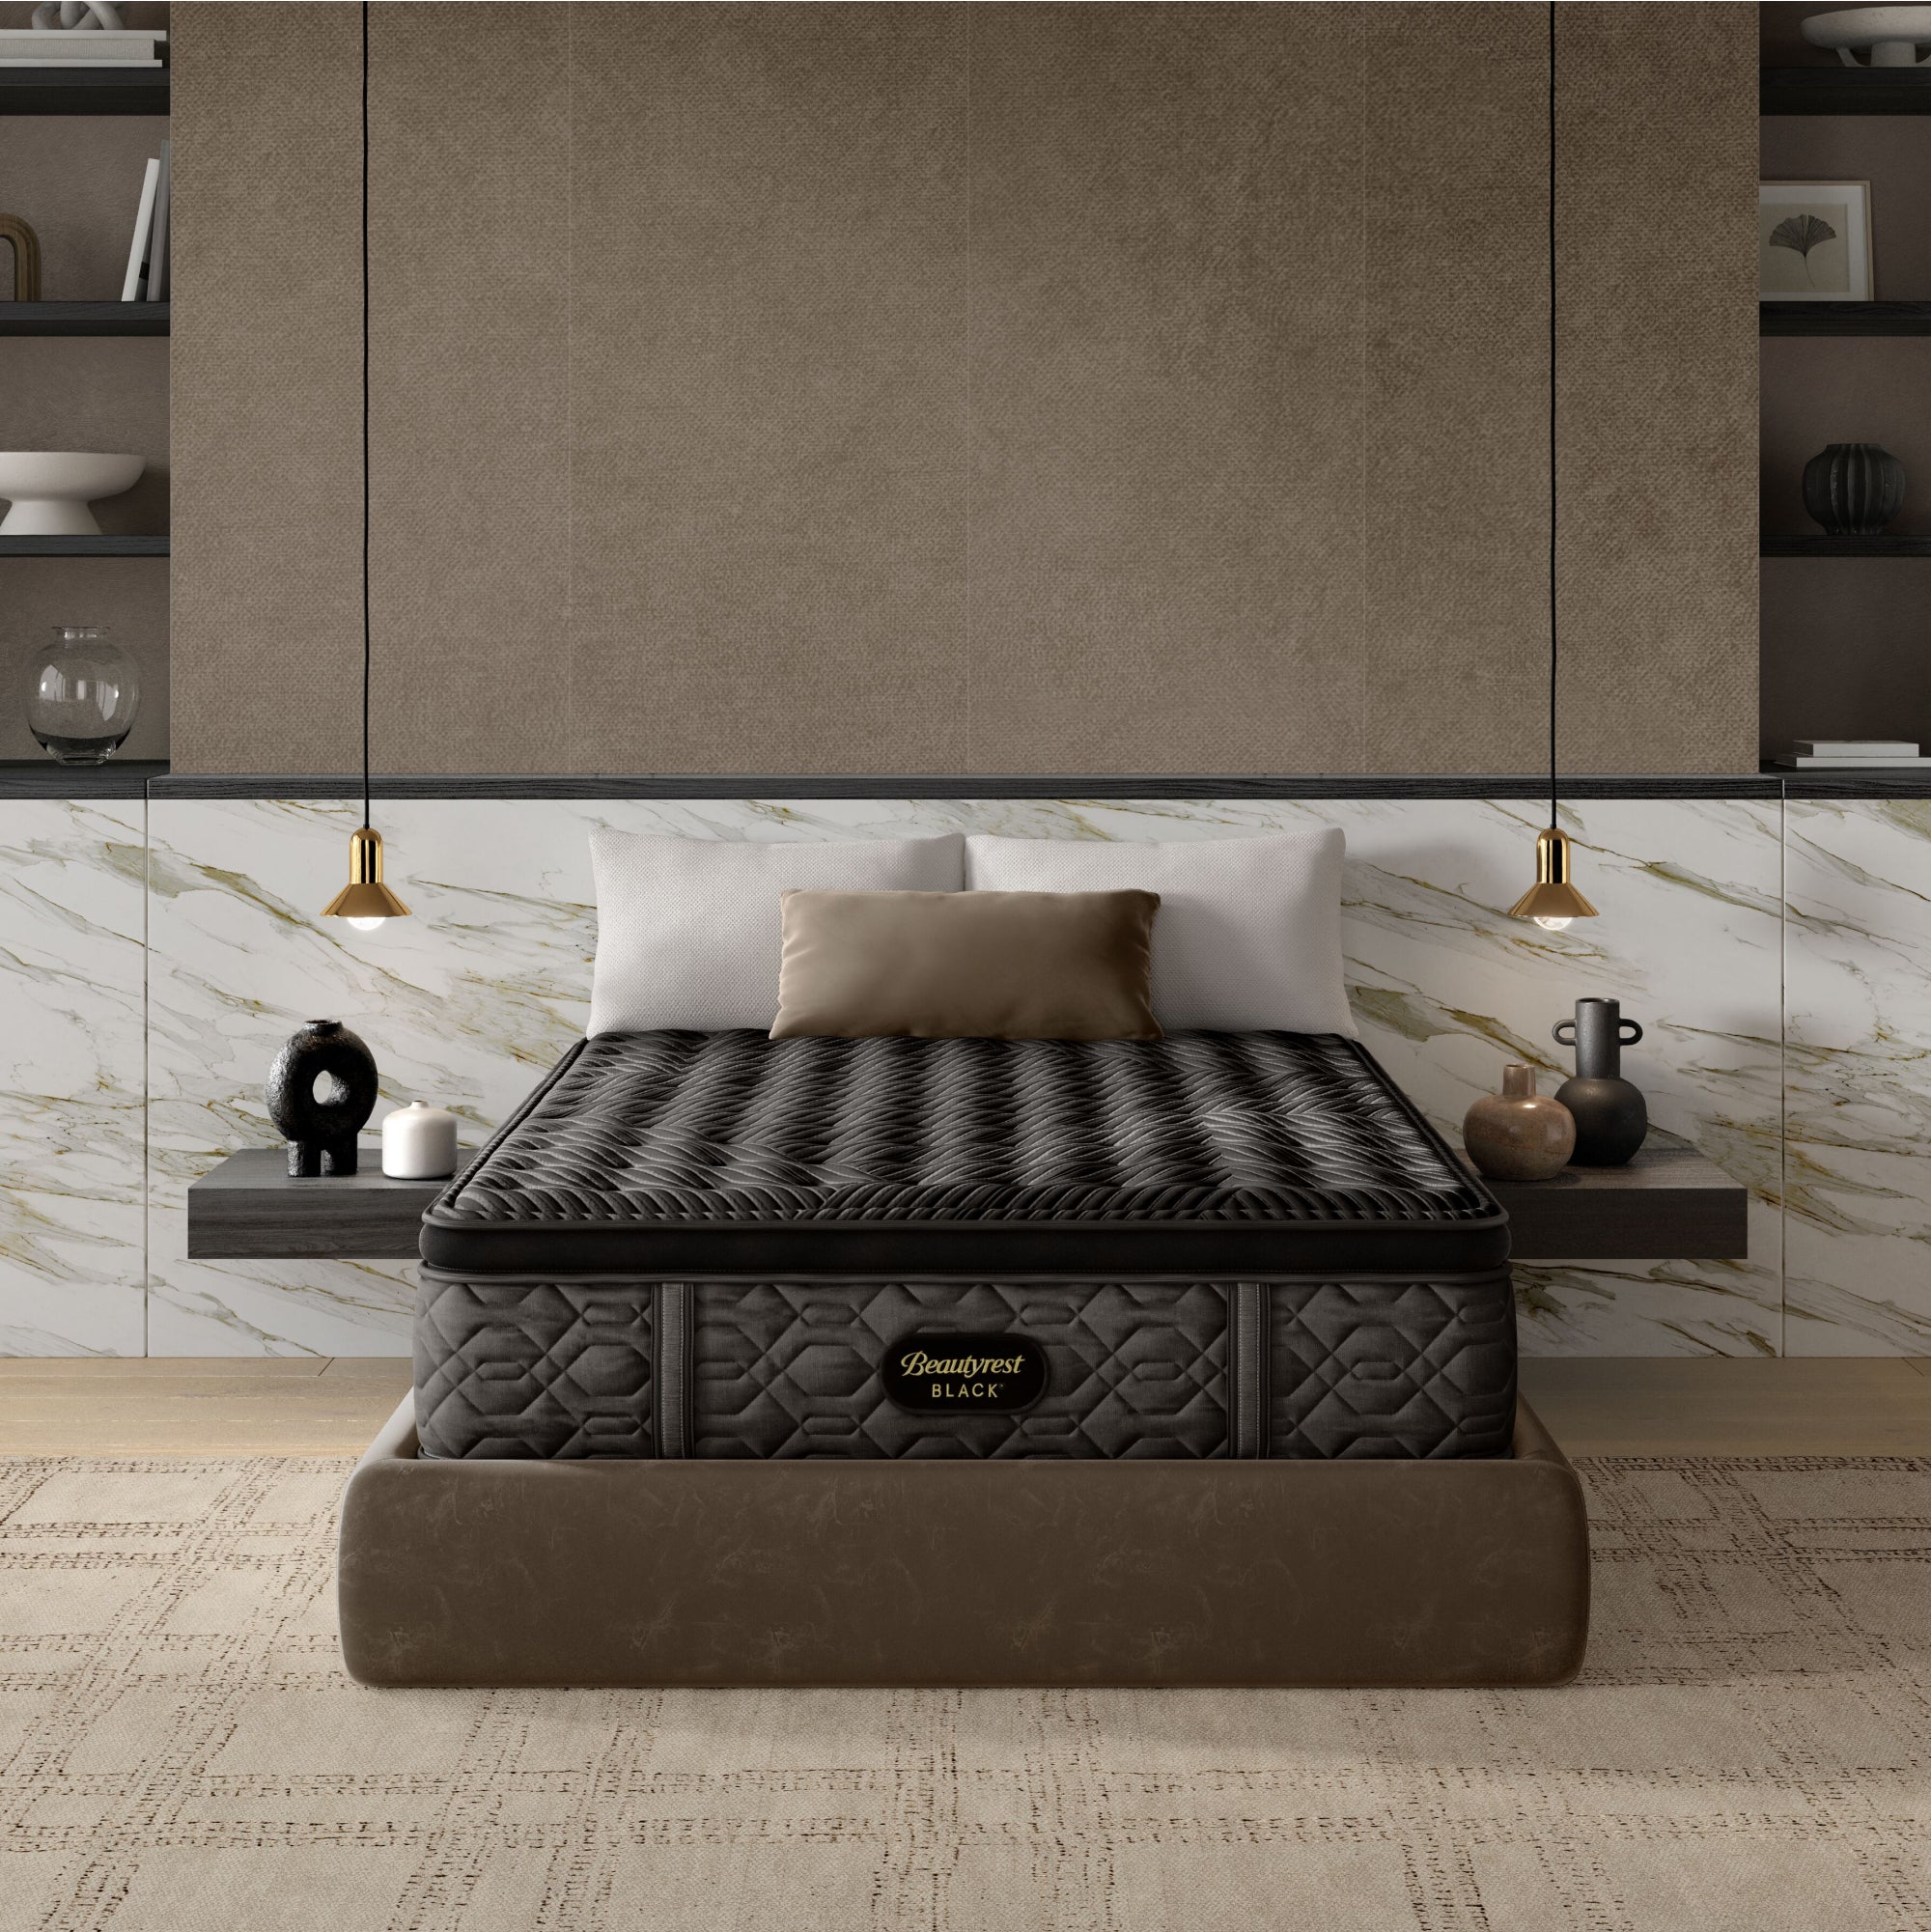 The Beautyrest Black firm pillow top mattress in a bedroom on a brown bed frame || series: Series One || feel: firm pillow top